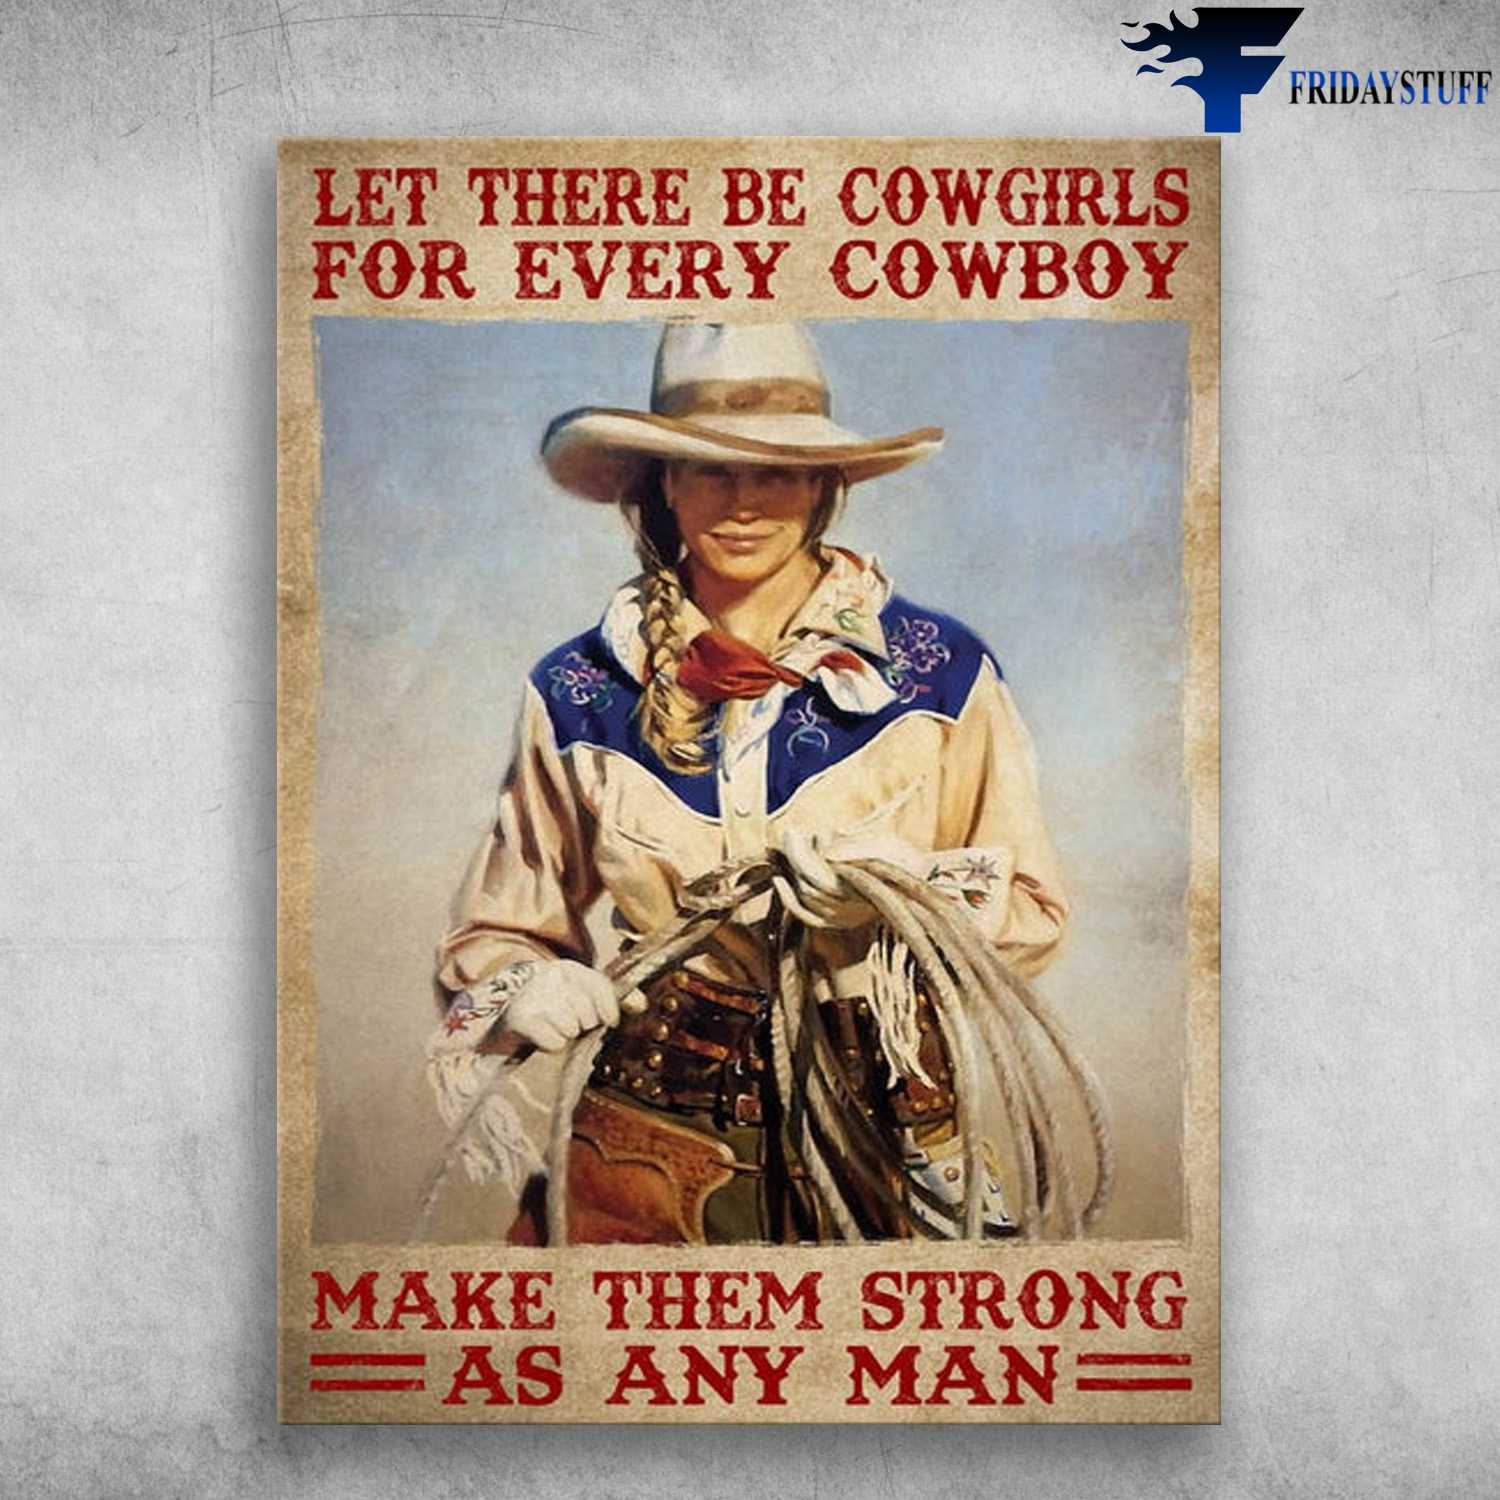 Cowgirl Poster - Let There Be Cowgirls, For Every Cowboy, Make Them Strong As Any Man